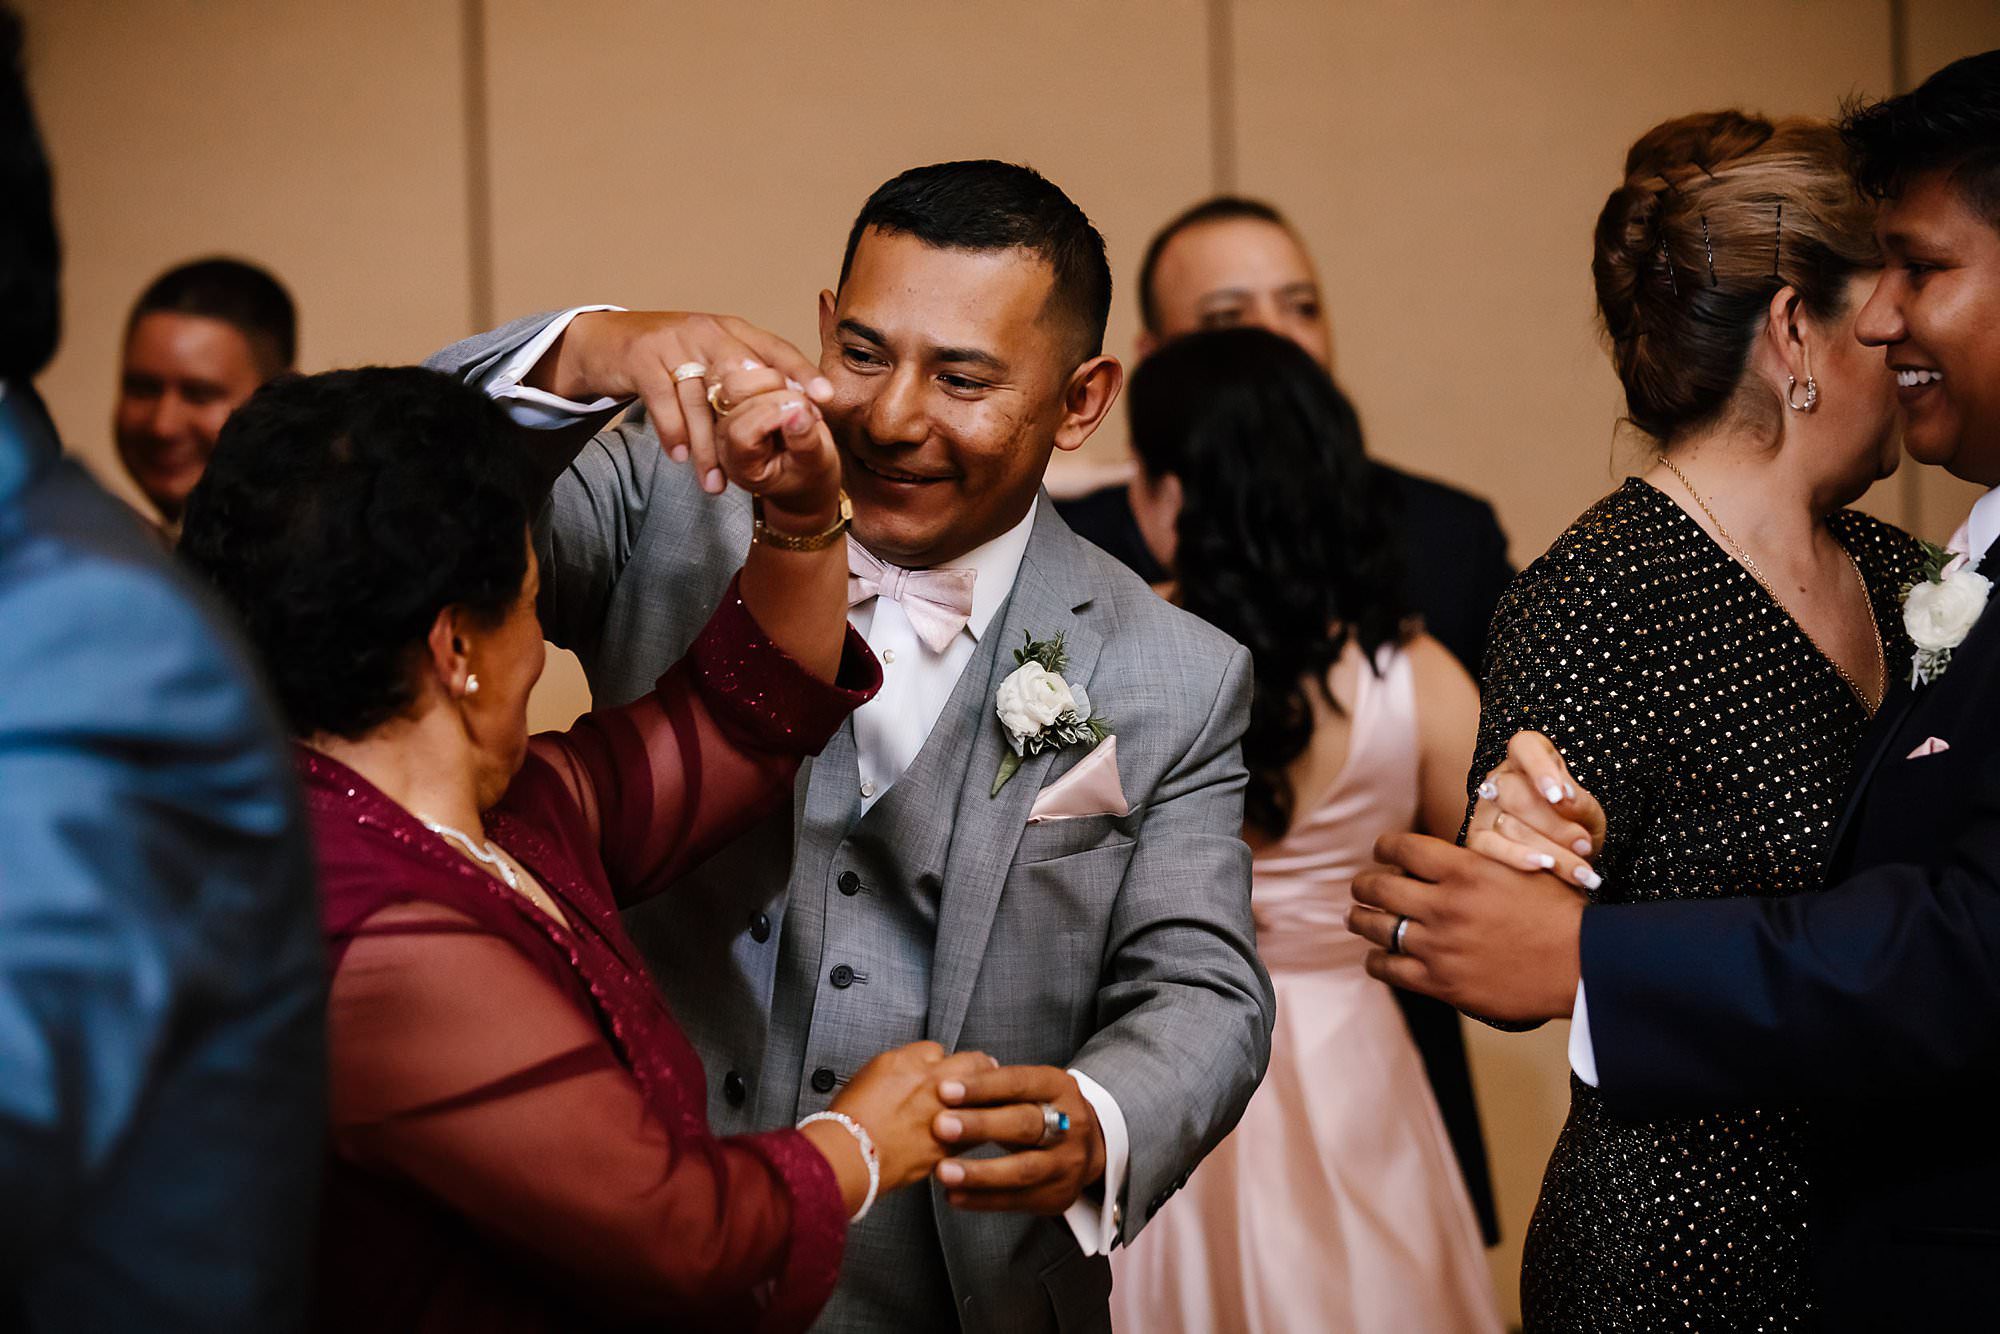 Groom dancing with aunt at wedding